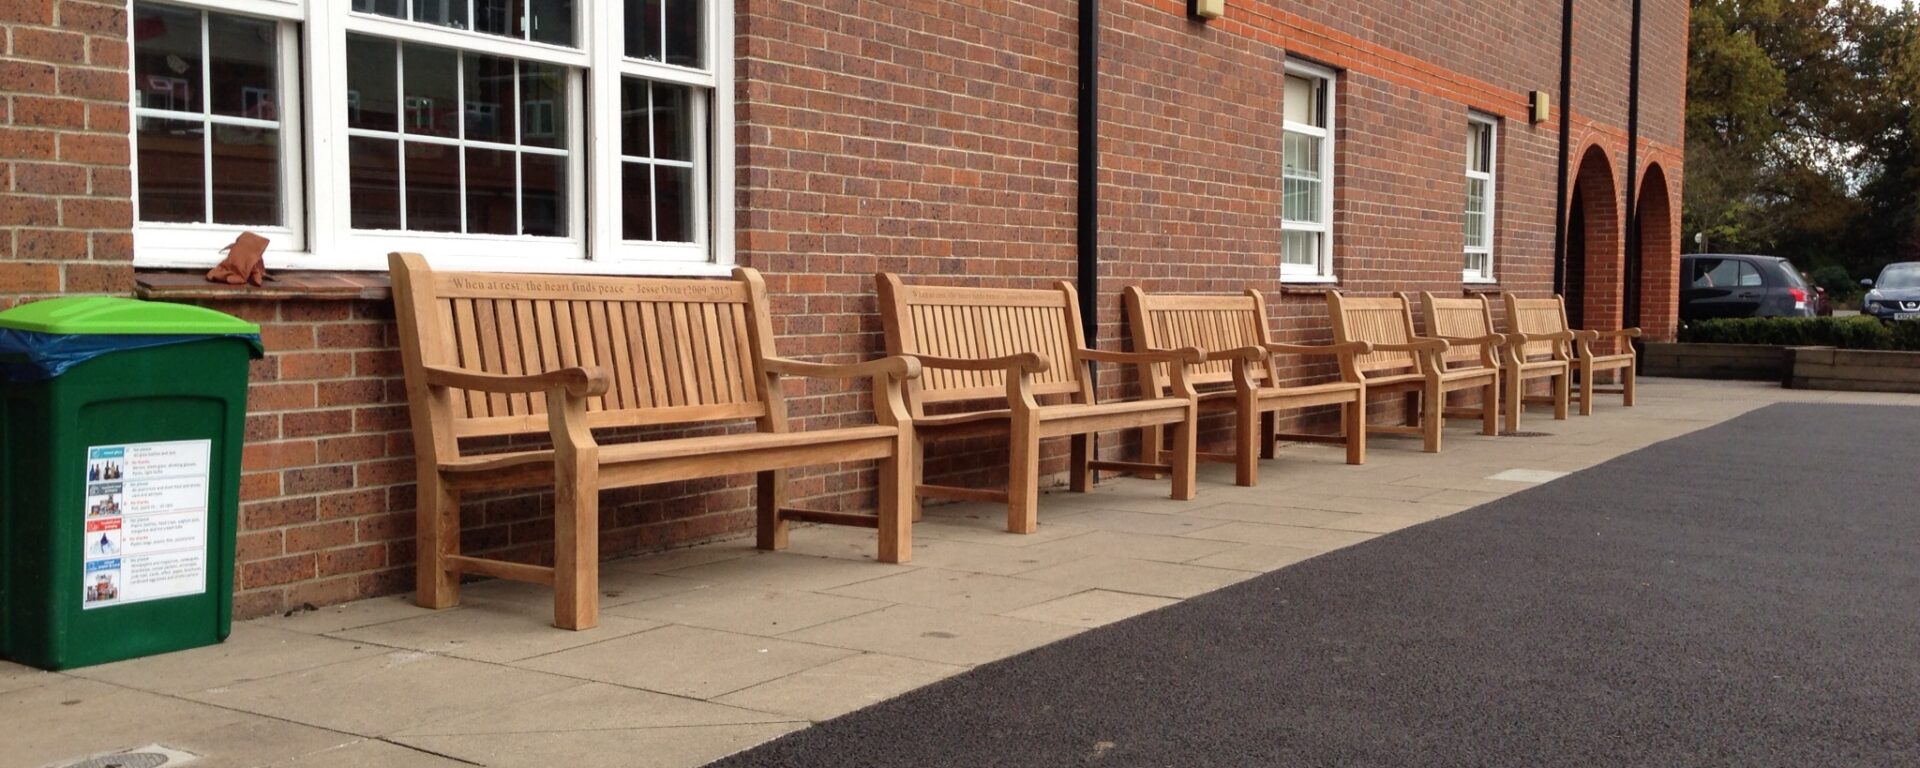 commercial benches in a university setting outside